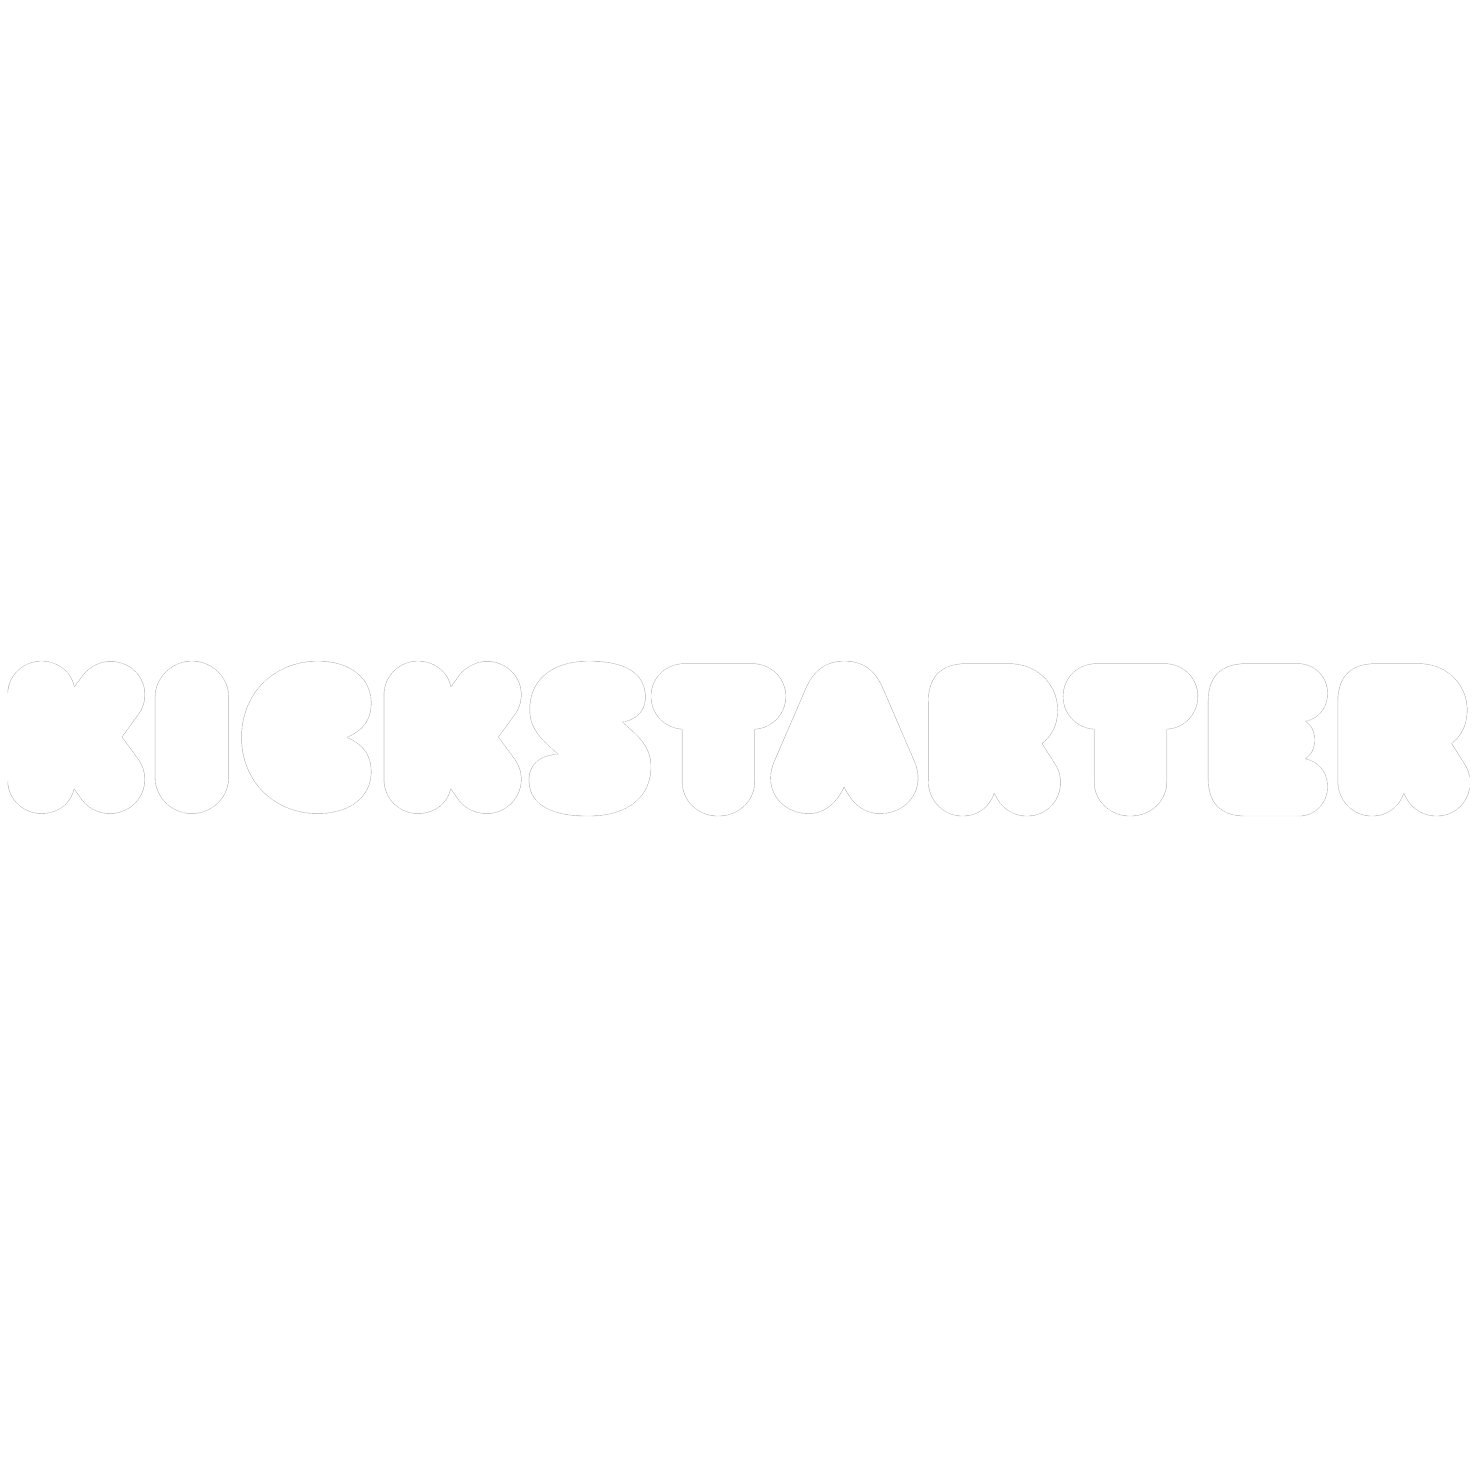 Raised over $100,000 USD through Kickstarter with over 1500 backers.